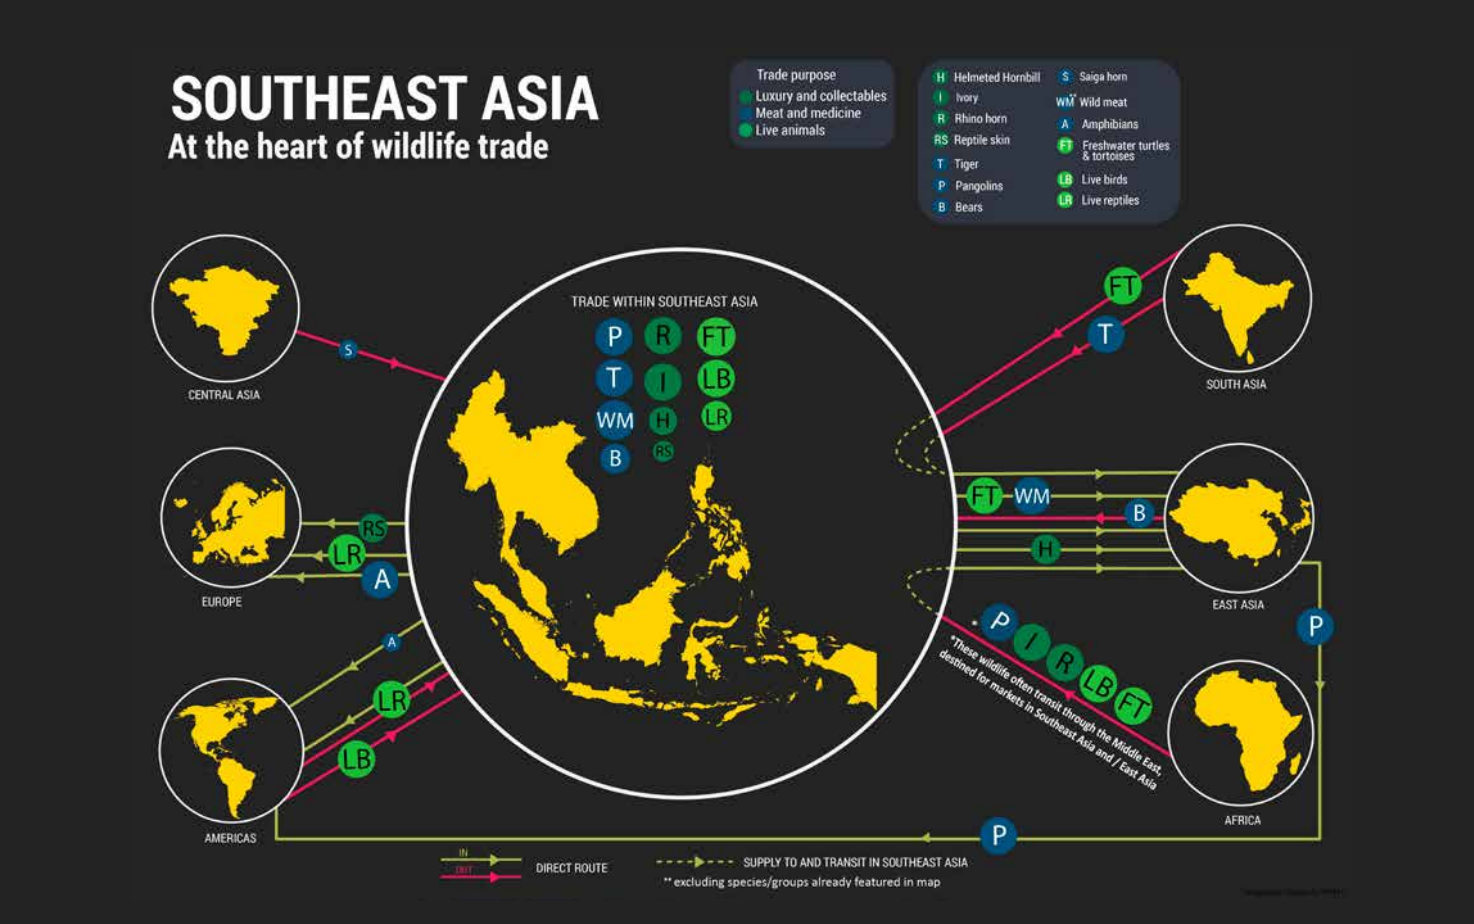 Summary of trade flow relationships between Southeast Asia and other regions (TRAFFIC Report: Southeast Asia: At the heart of wildlife trade, 2020)